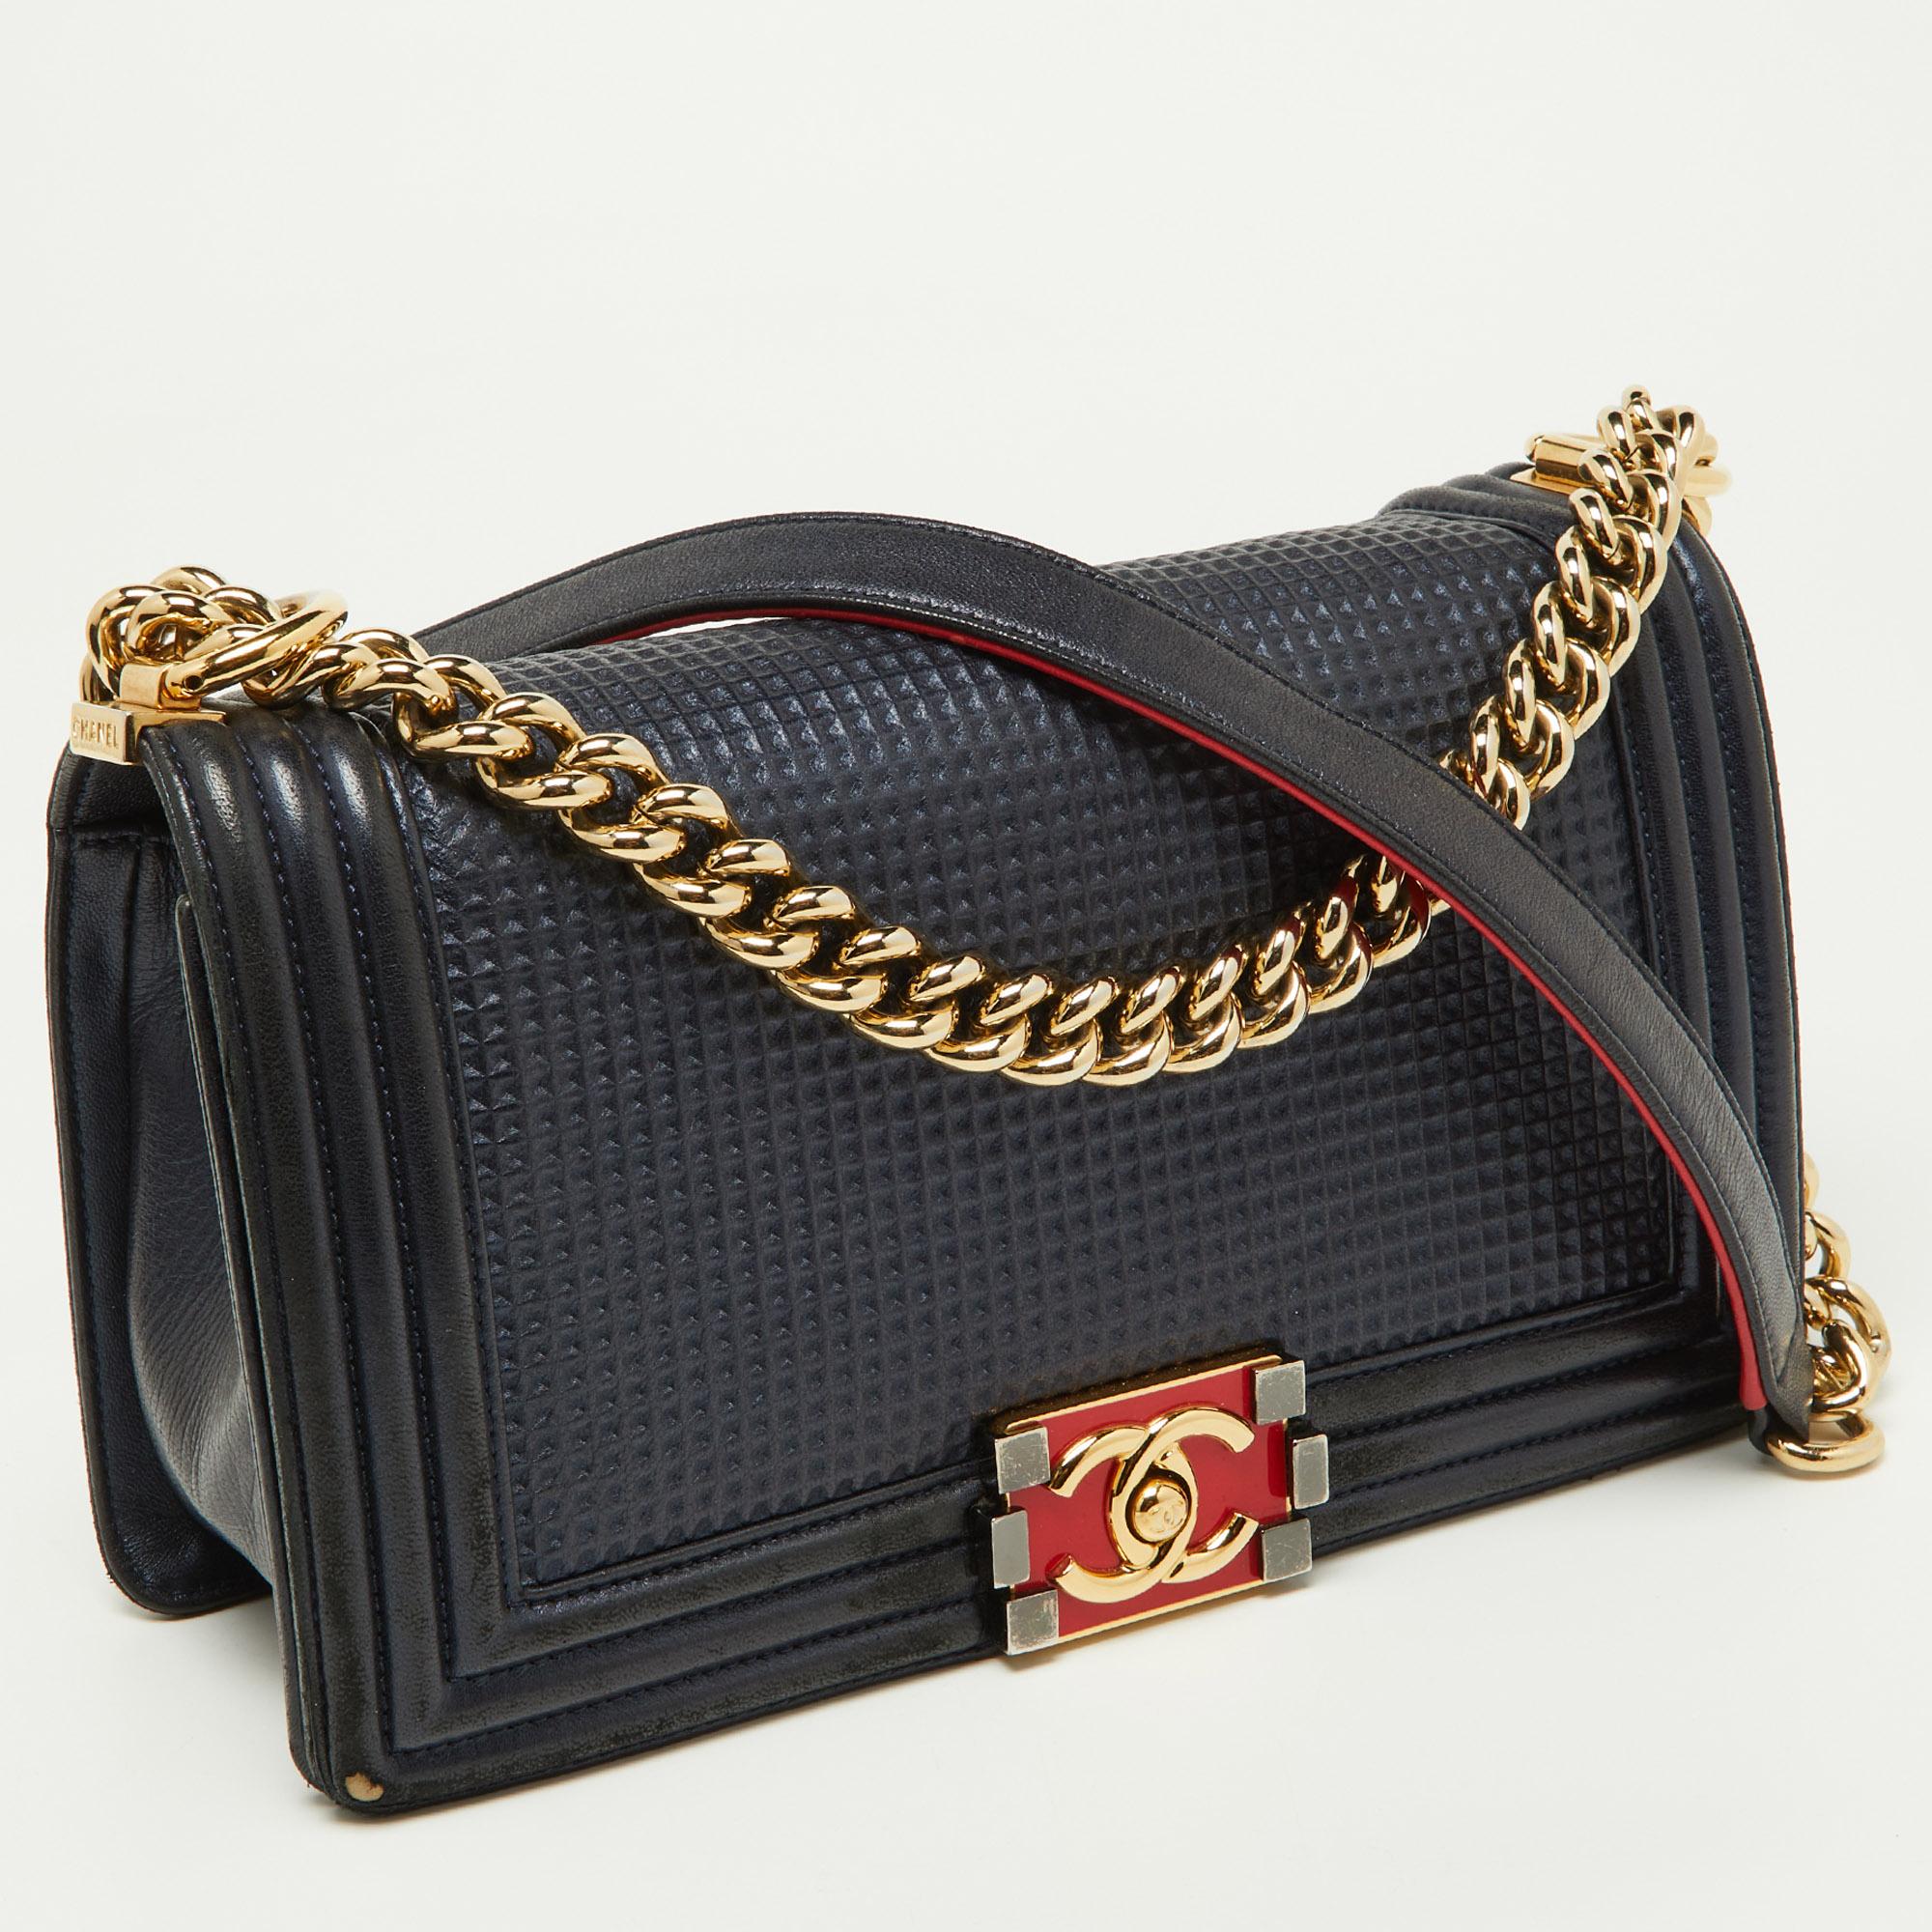 Chanel Dark Blue/Red Cube Embossed Leather Medium Boy Flap Bag For Sale 10